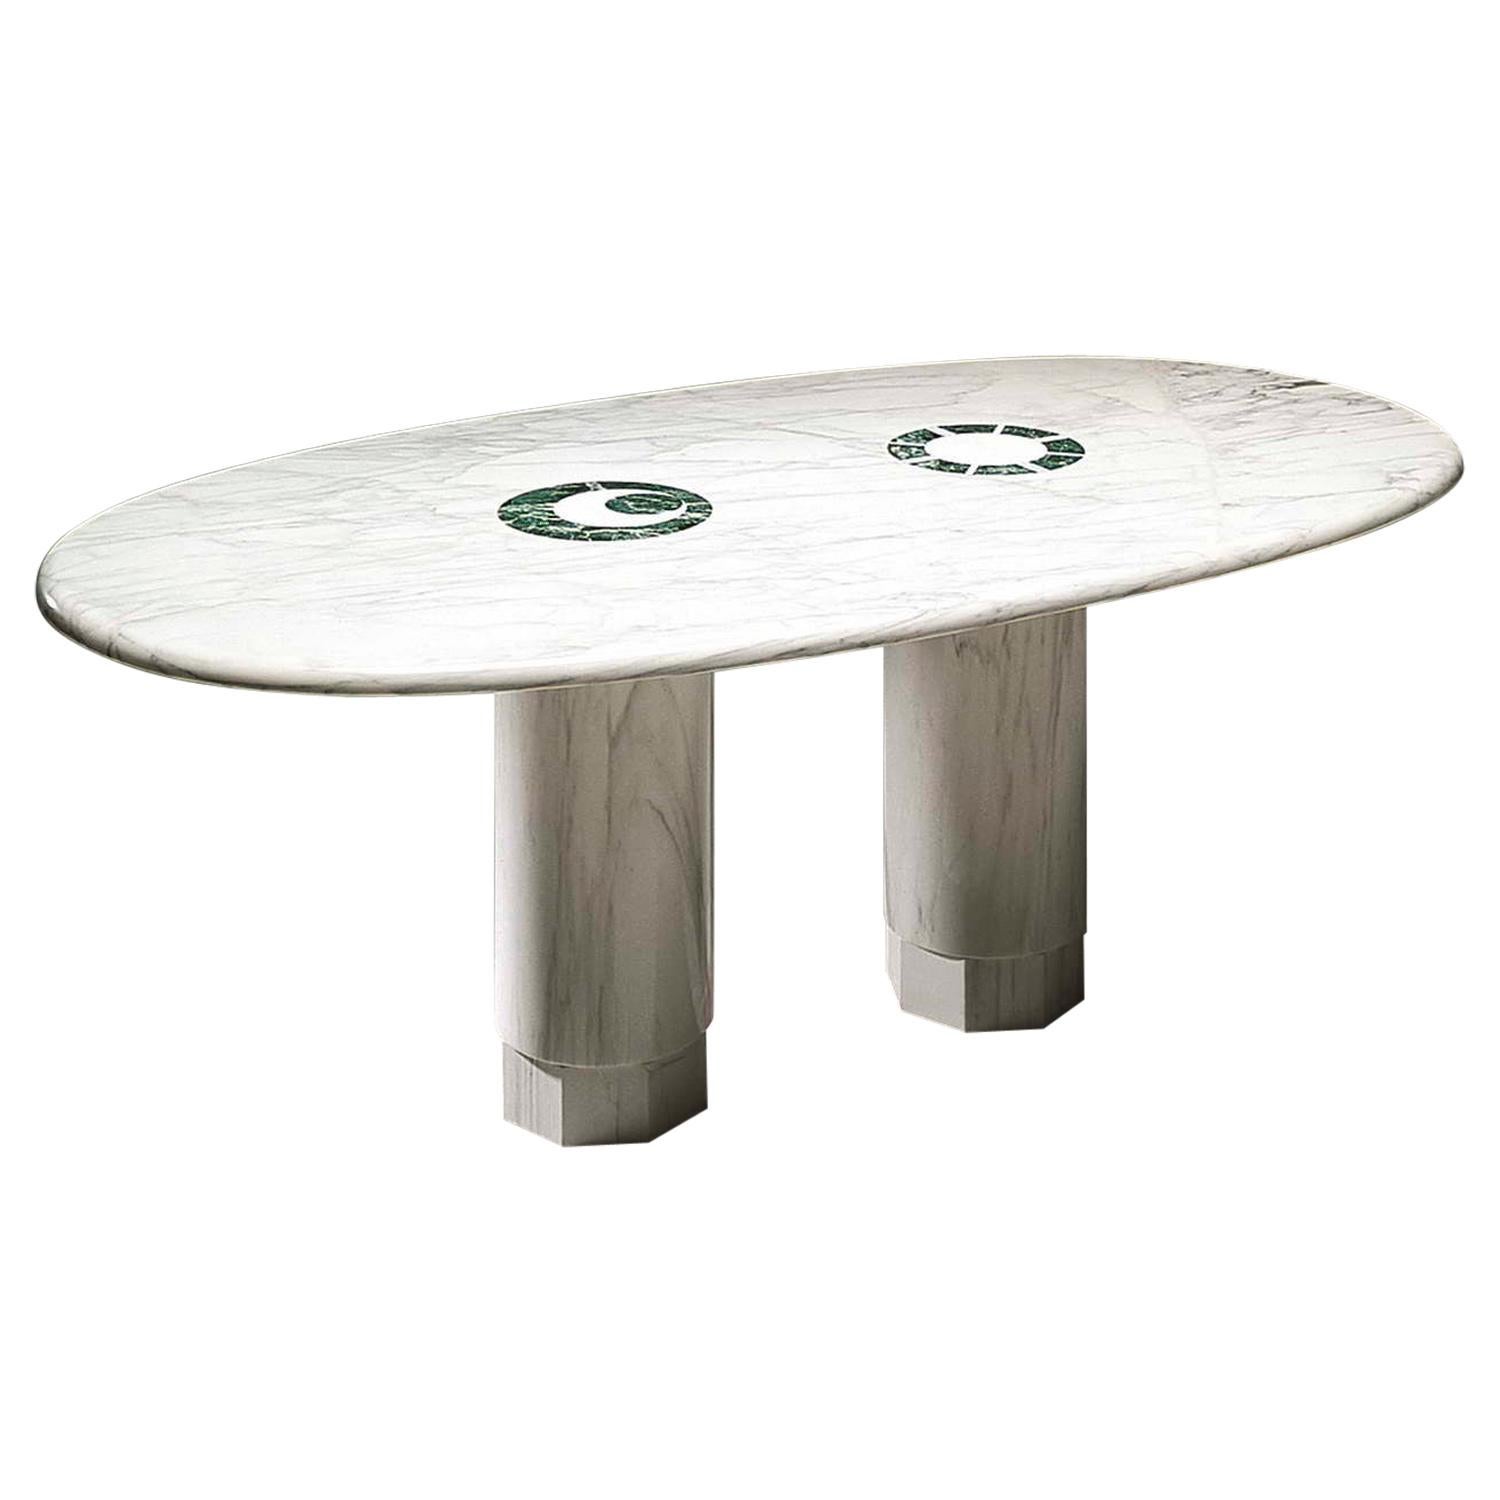 21st Century by Adolfo Natalini Sole e Luna Inlaid Marble Table White and Green For Sale